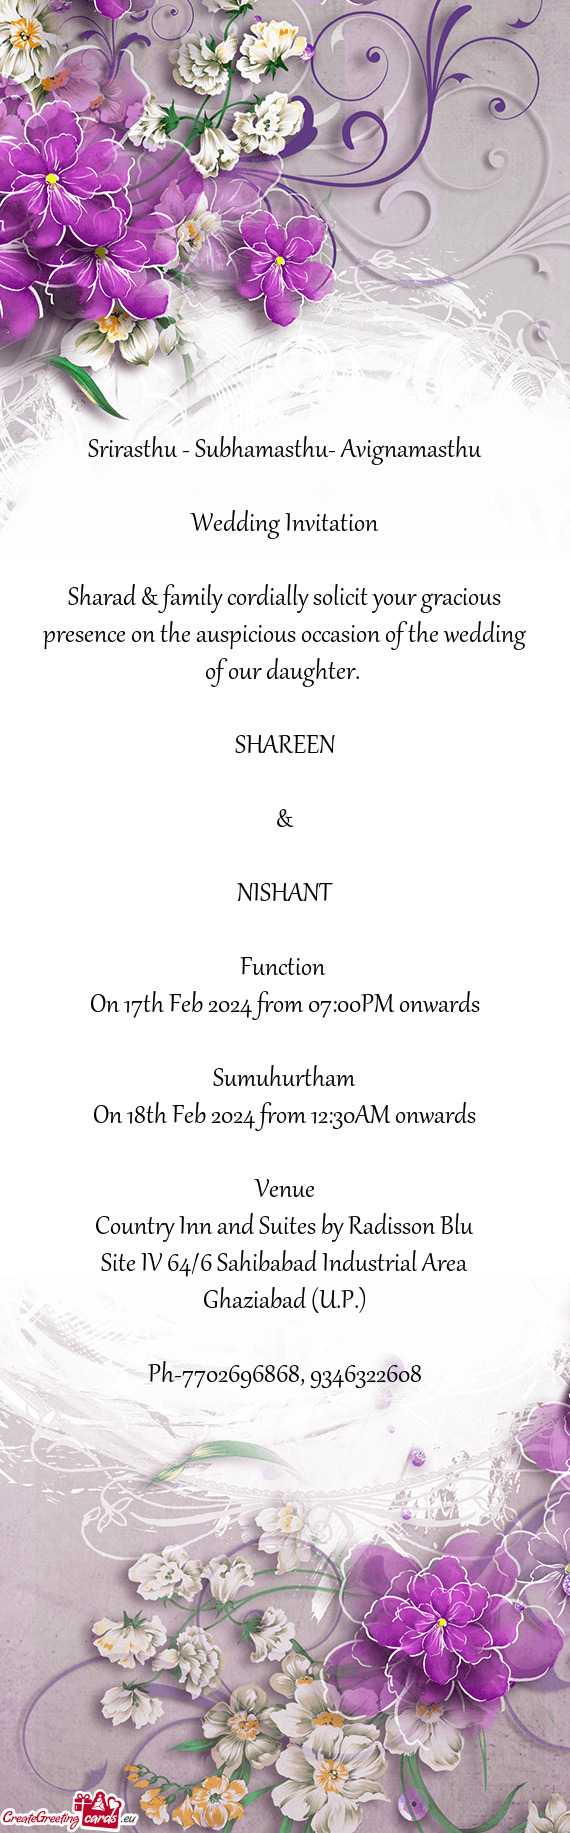 Sharad & family cordially solicit your gracious presence on the auspicious occasion of the wedding o